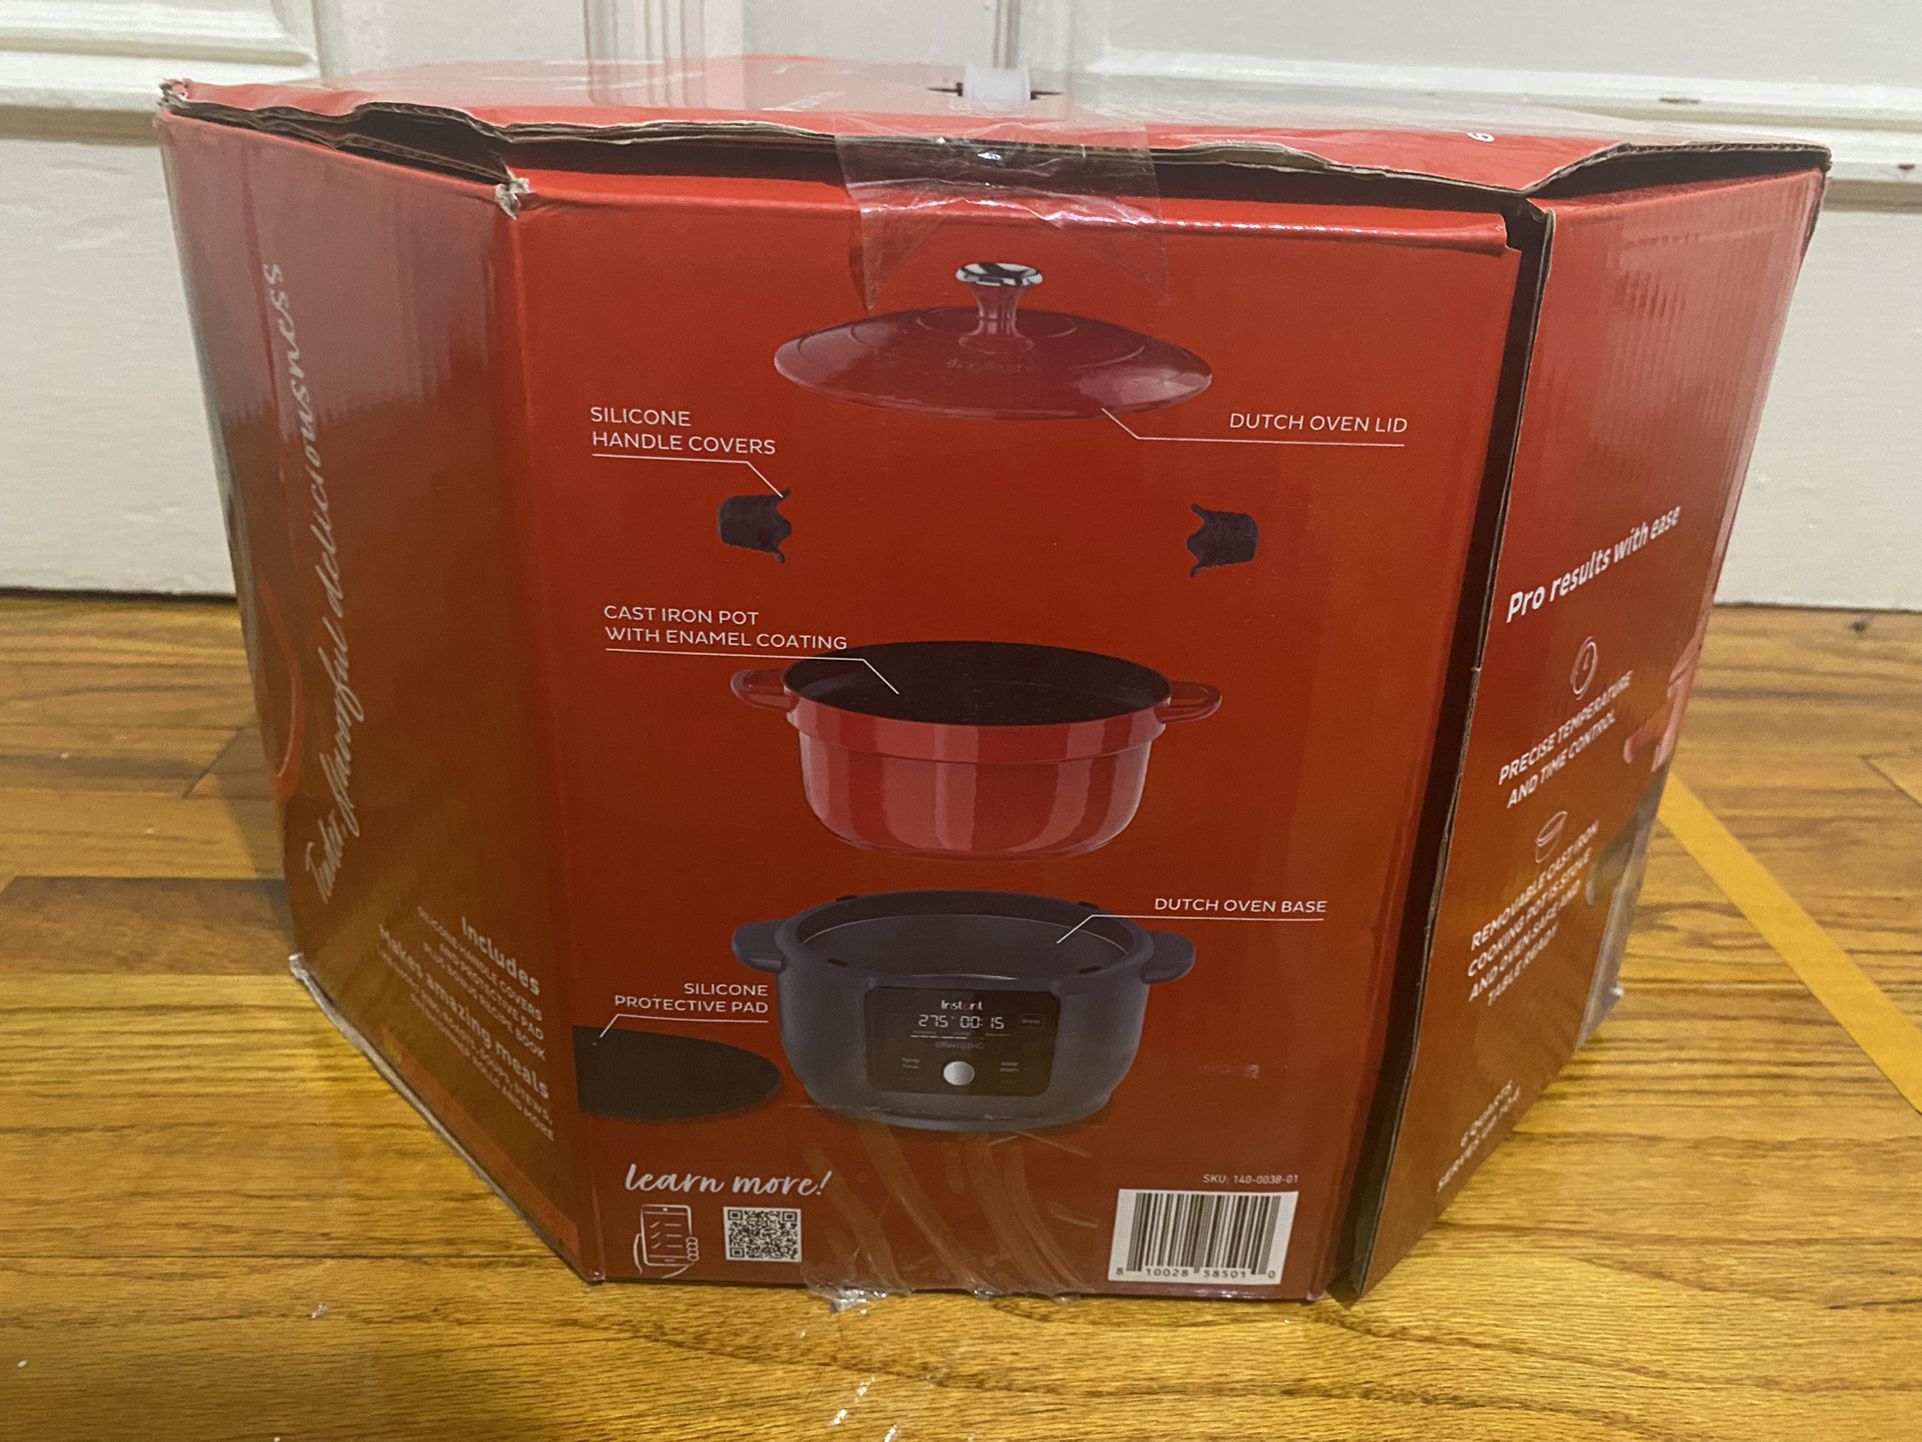 Instant Pot Electric Dutch Oven 5 In 1 for Sale in Brooklyn, NY - OfferUp